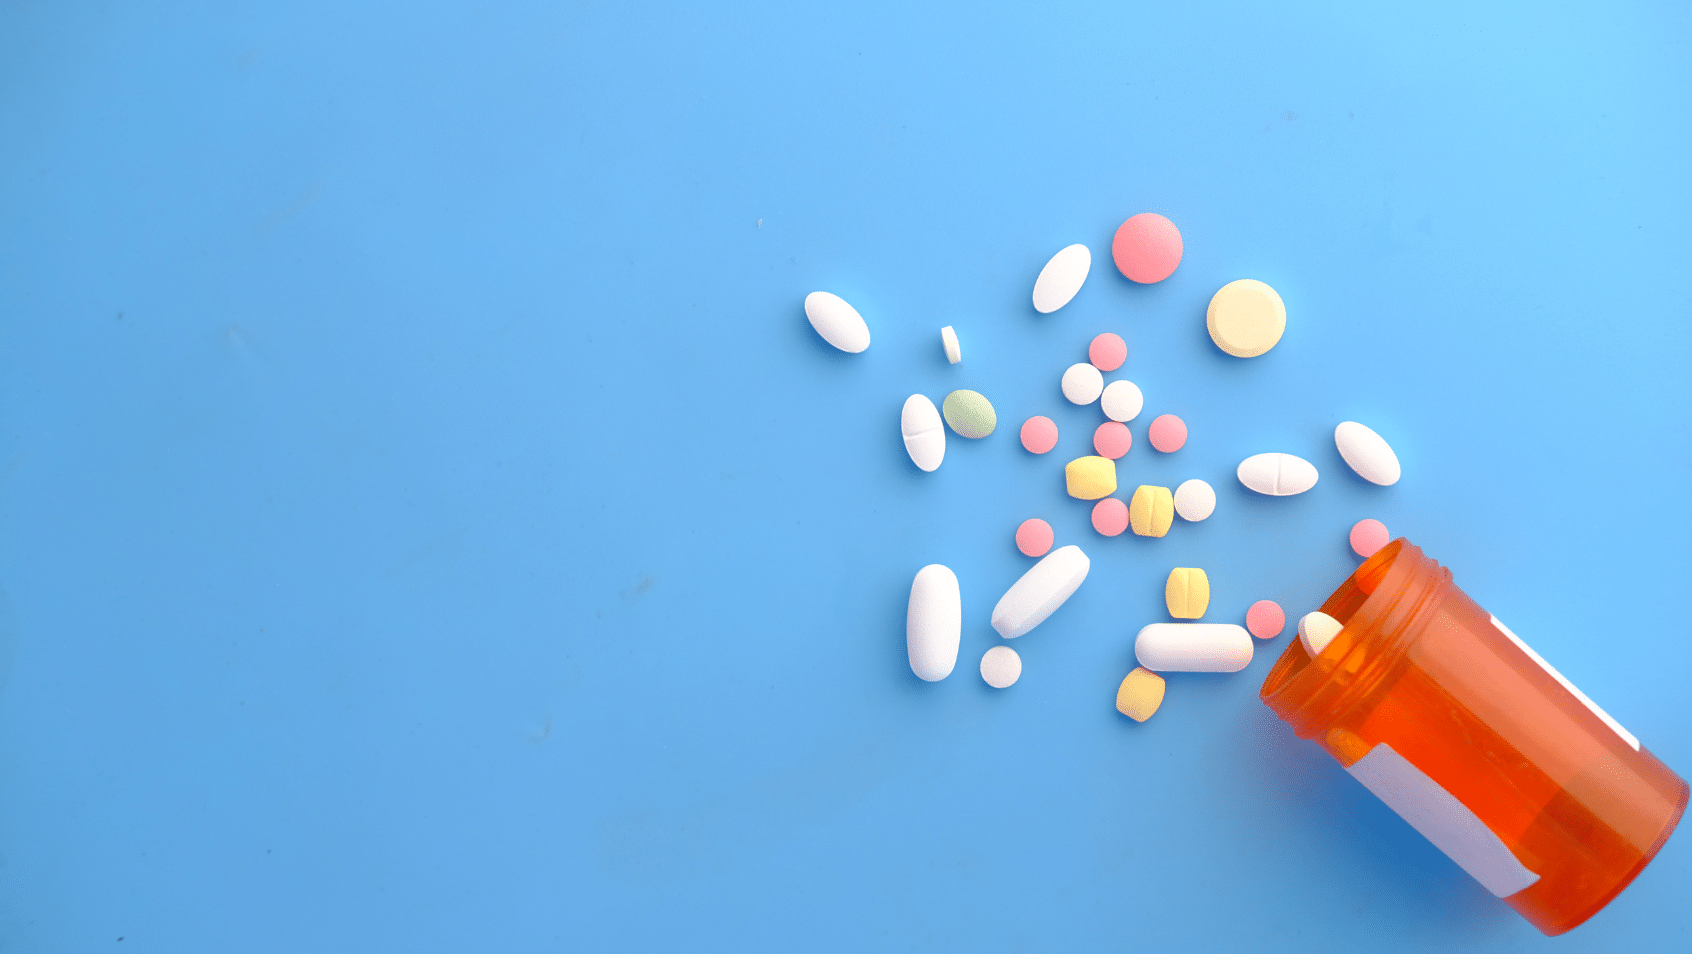 Pills spill out from an orange prescription bottle on a blue background